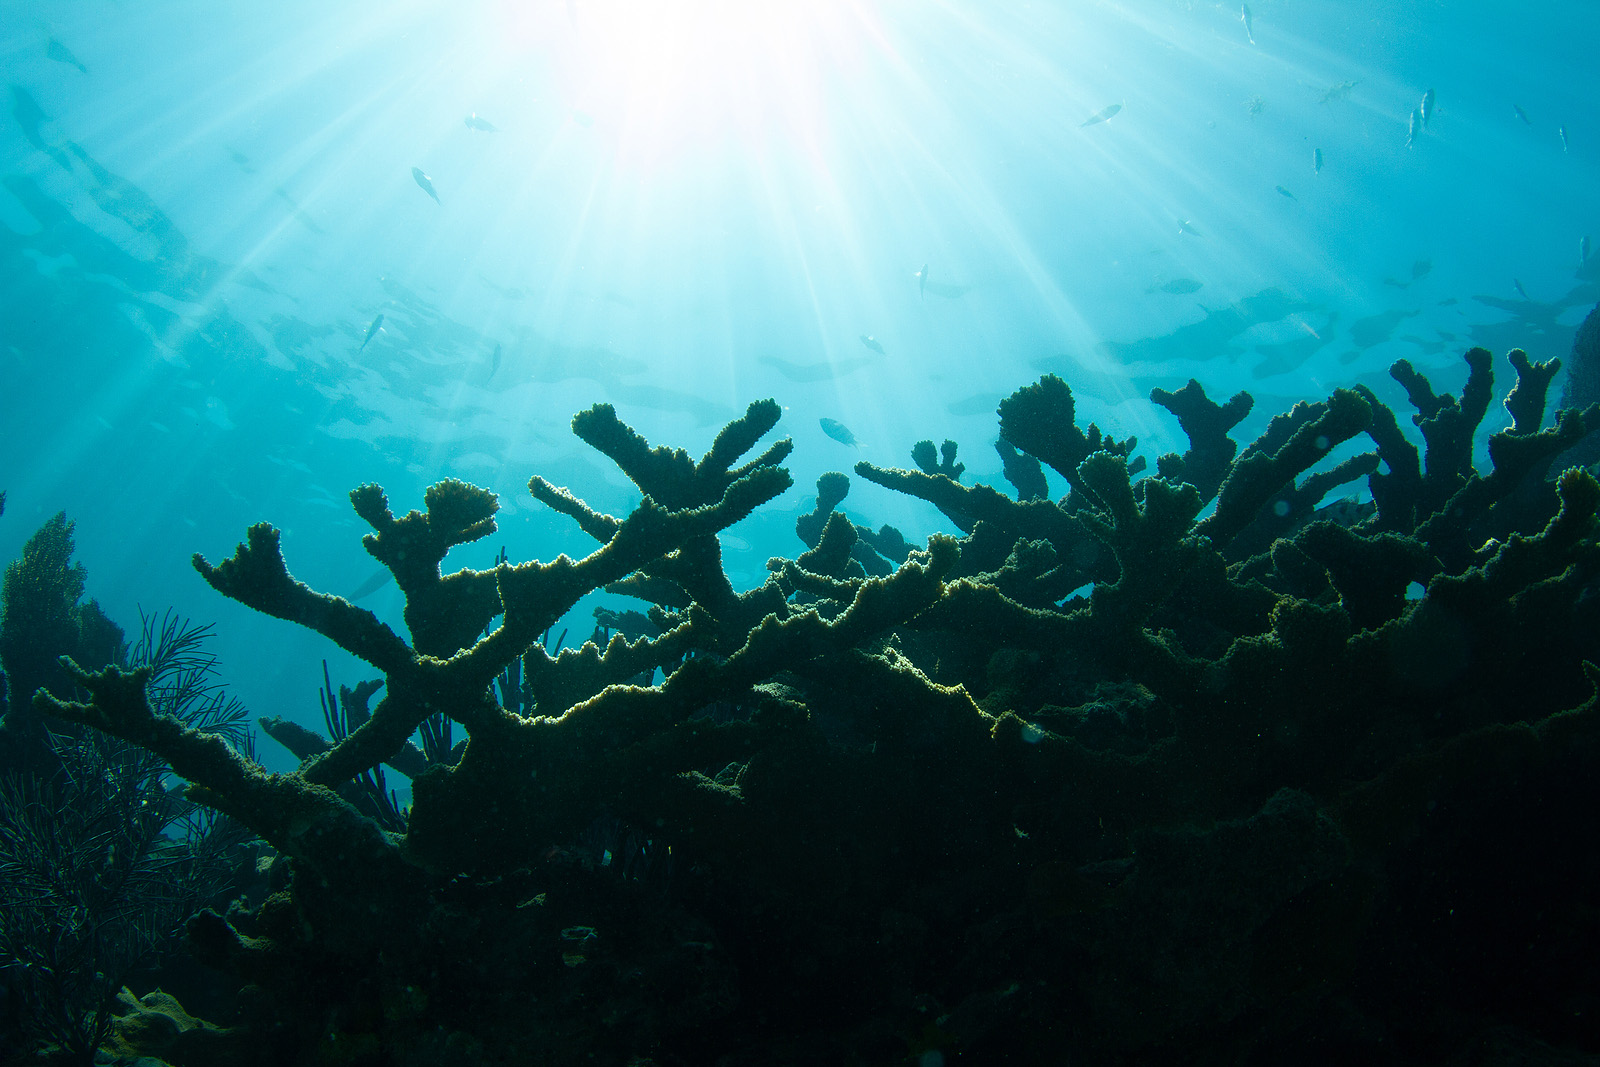 Sunlight shines through water over endangered coral reef (Credit: Bigstock)